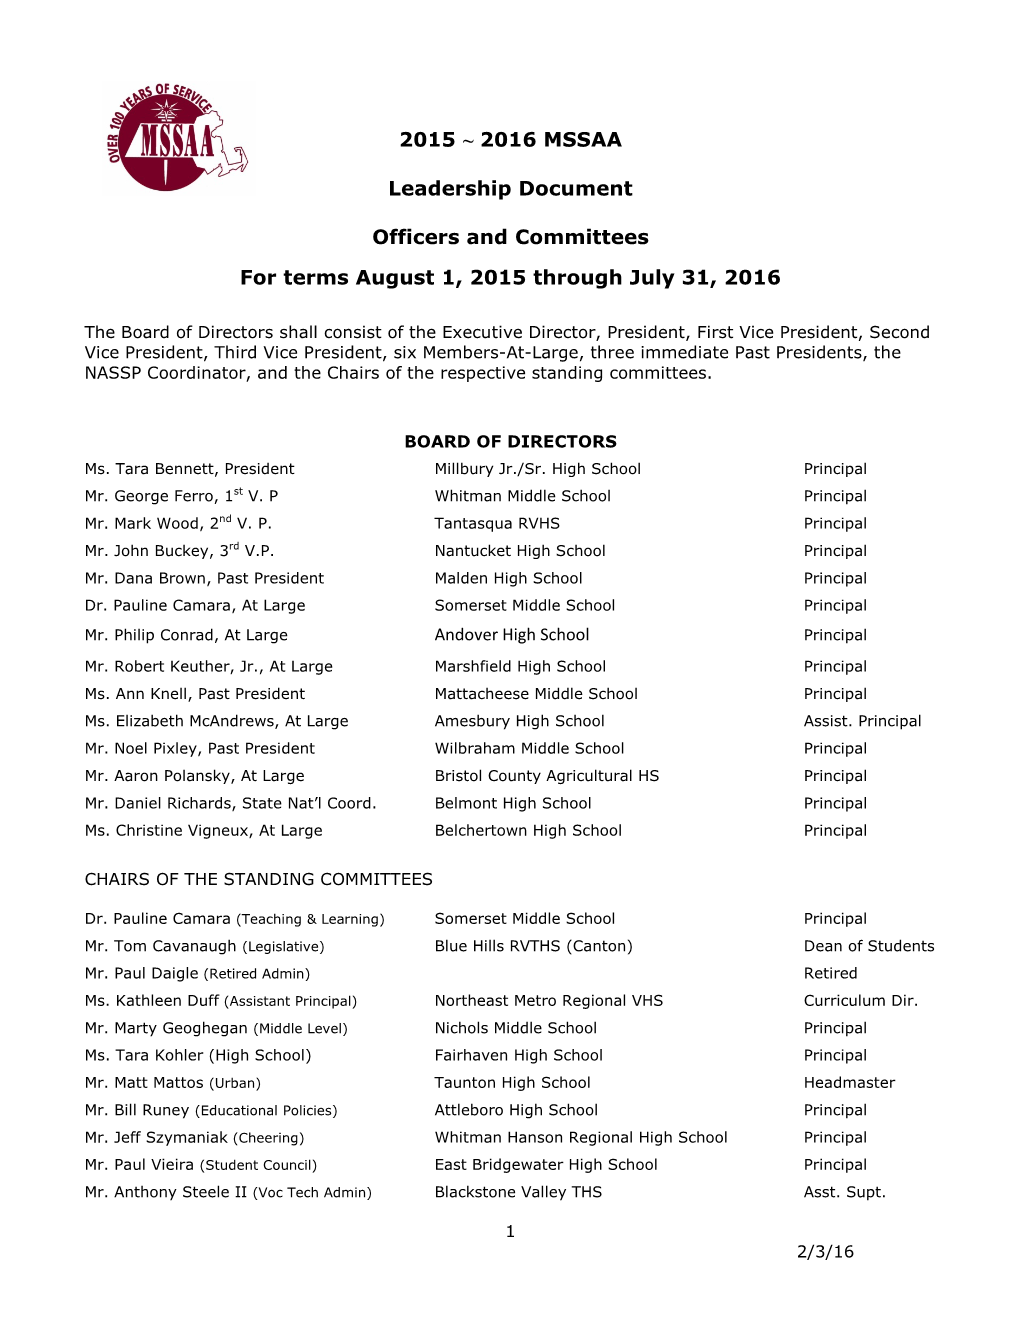 2015 ~ 2016 MSSAA Leadership Document Officers and Committees